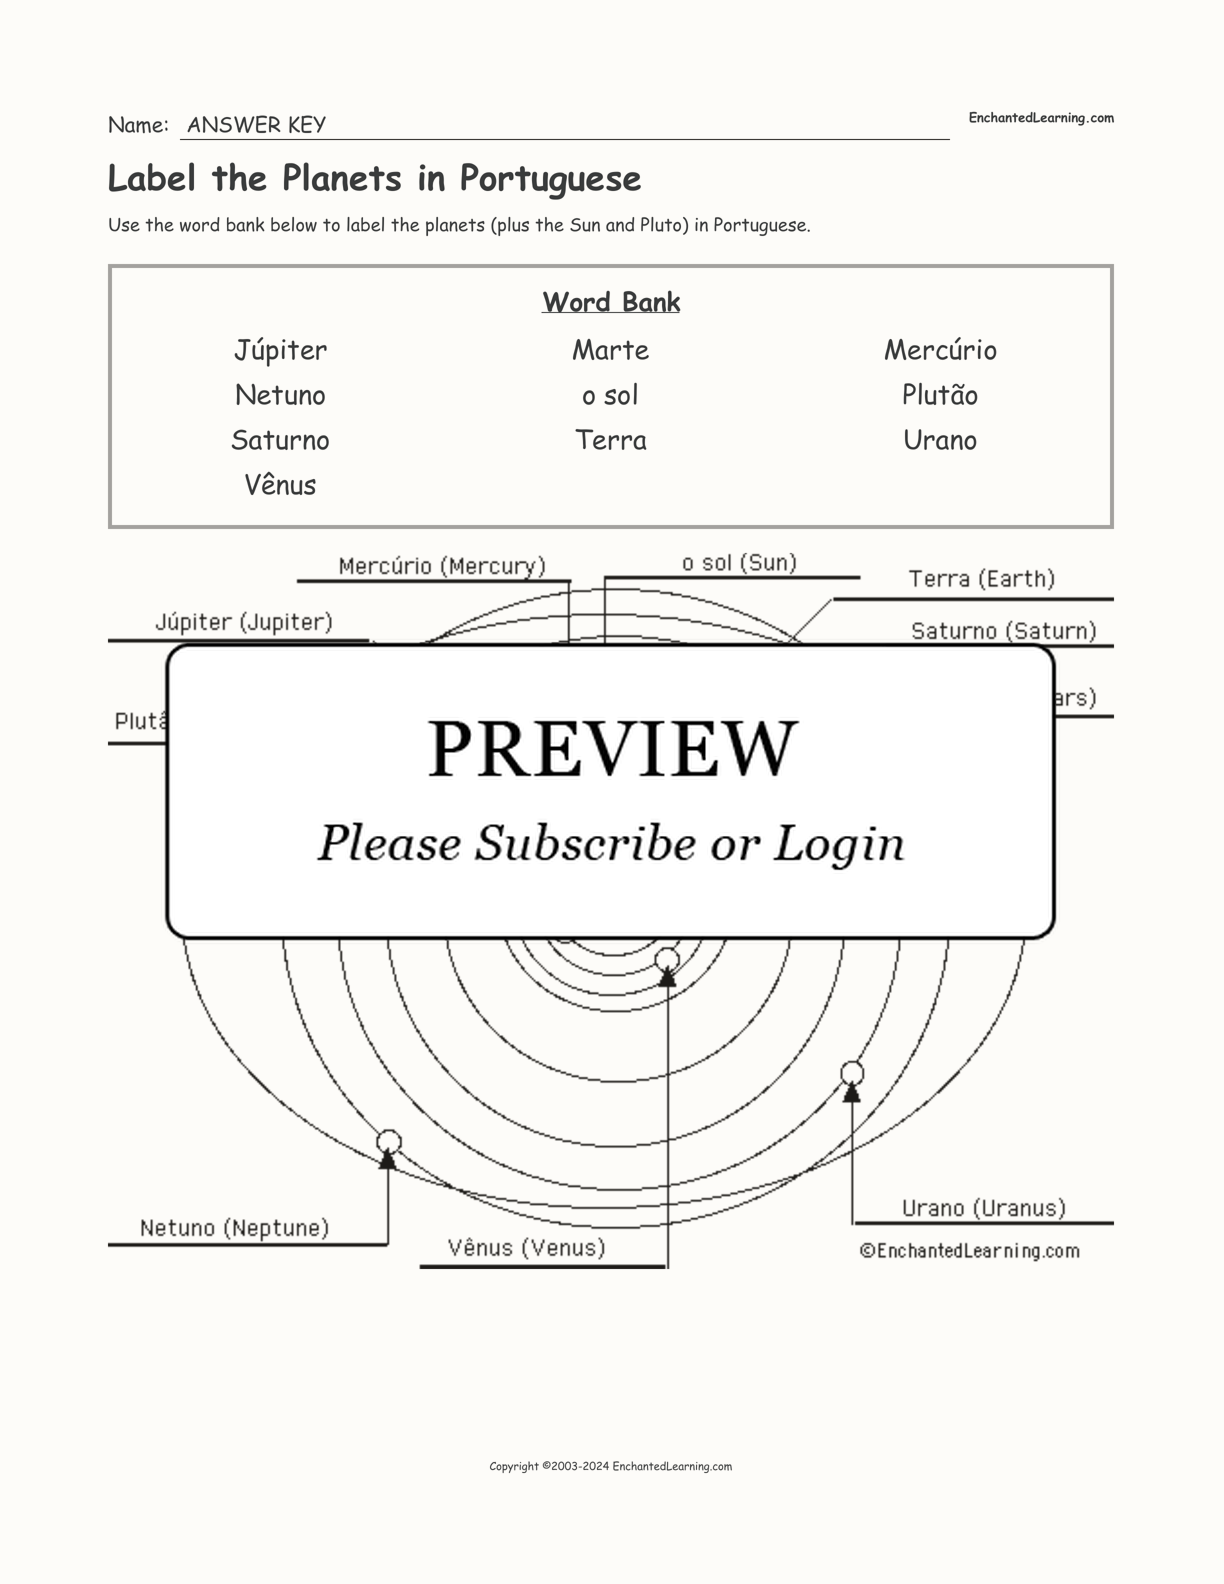 Label the Planets in Portuguese interactive worksheet page 2